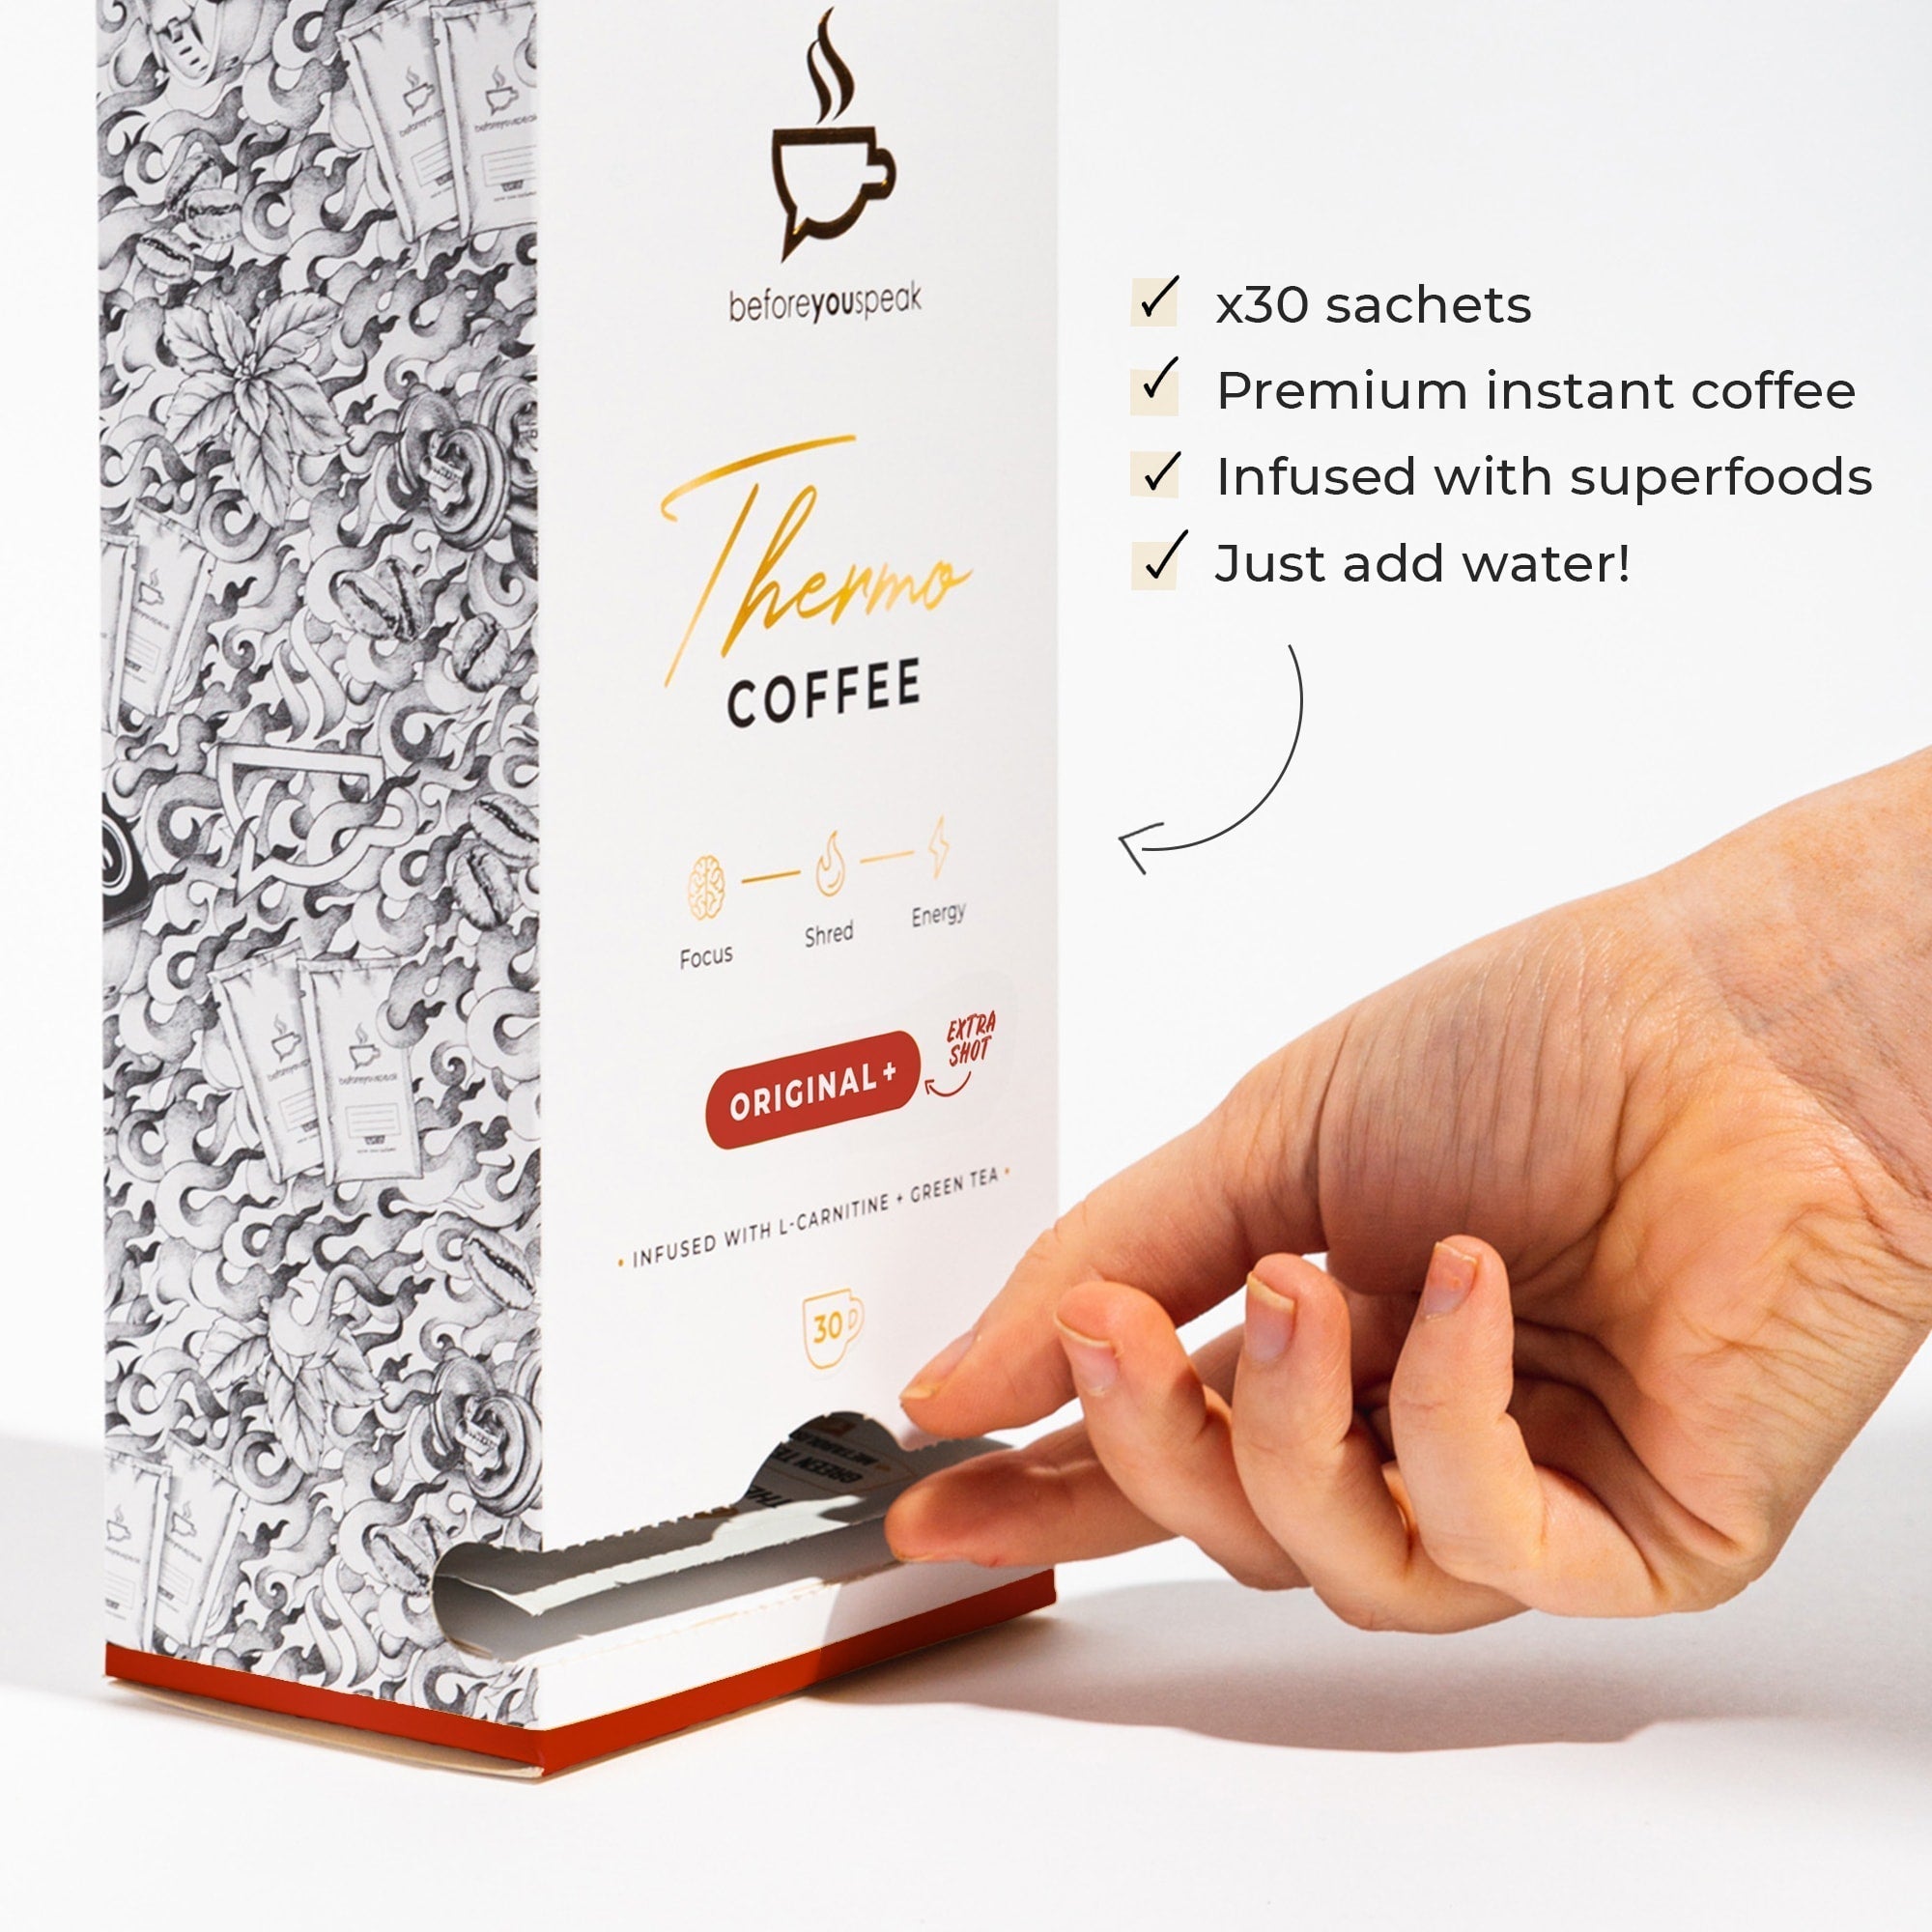 Thermo Coffee Octane ORIGINAL+ EXTRA SHOT - Exquisite Laser Clinic